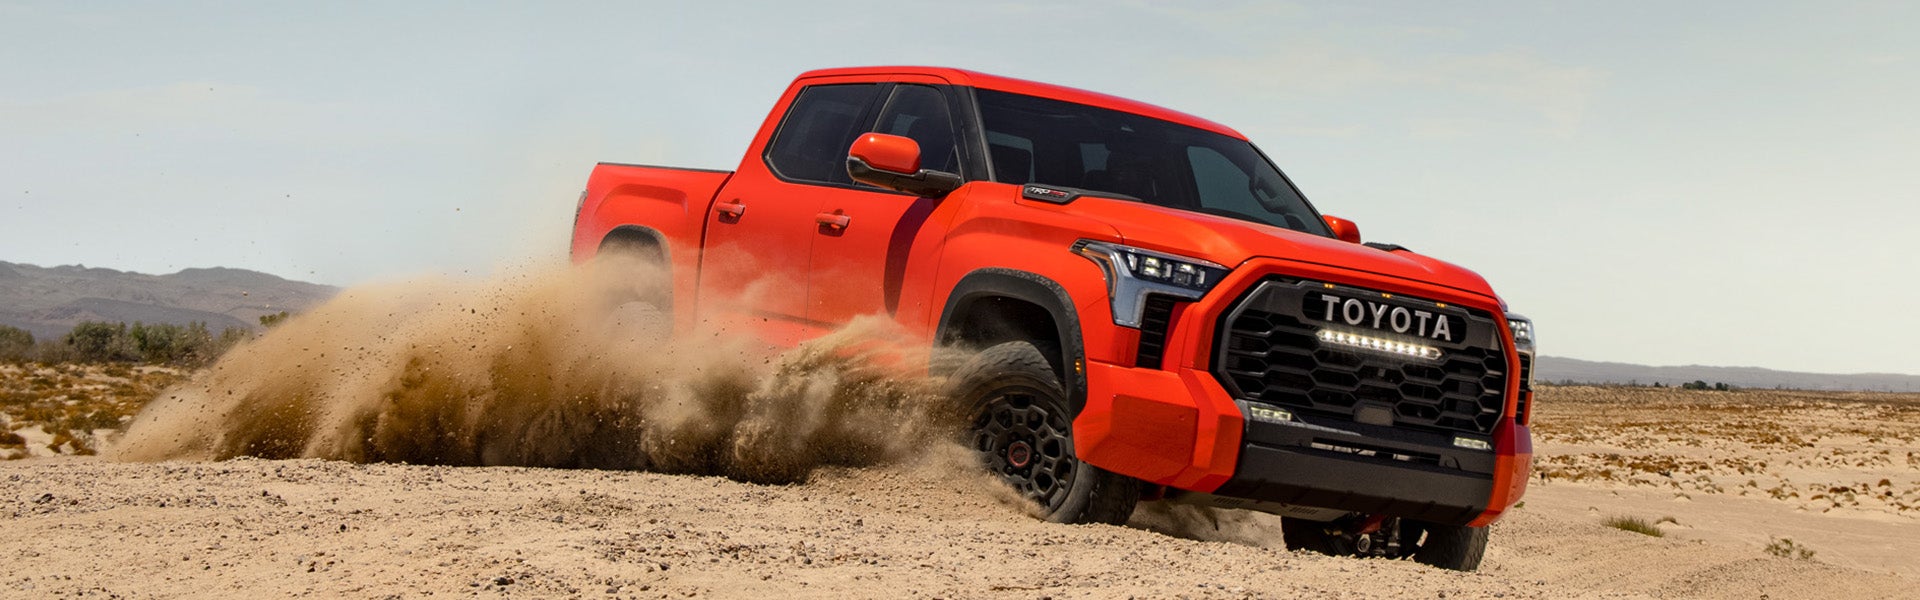 The All-New 2022 Toyota Tundra at Bennett Toyota in Allentown | Red 2022 Toyota Tundra Driving Through Desert